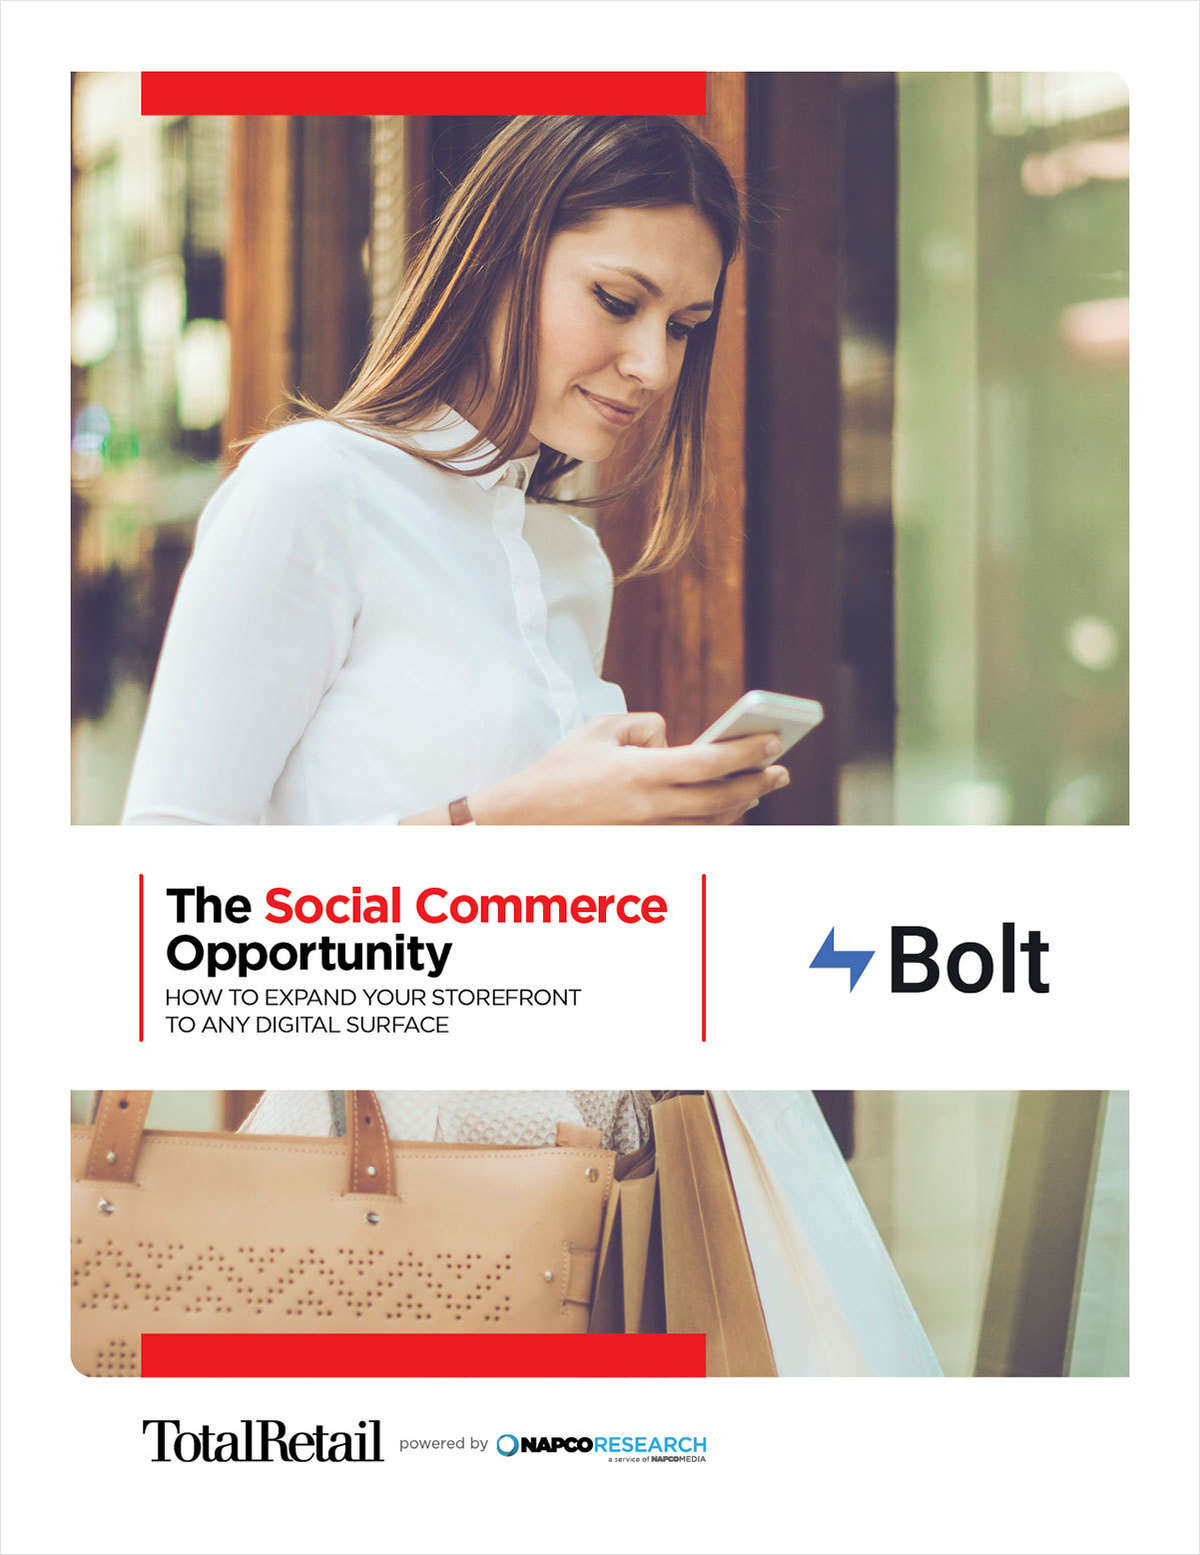 The Social Commerce Opportunity